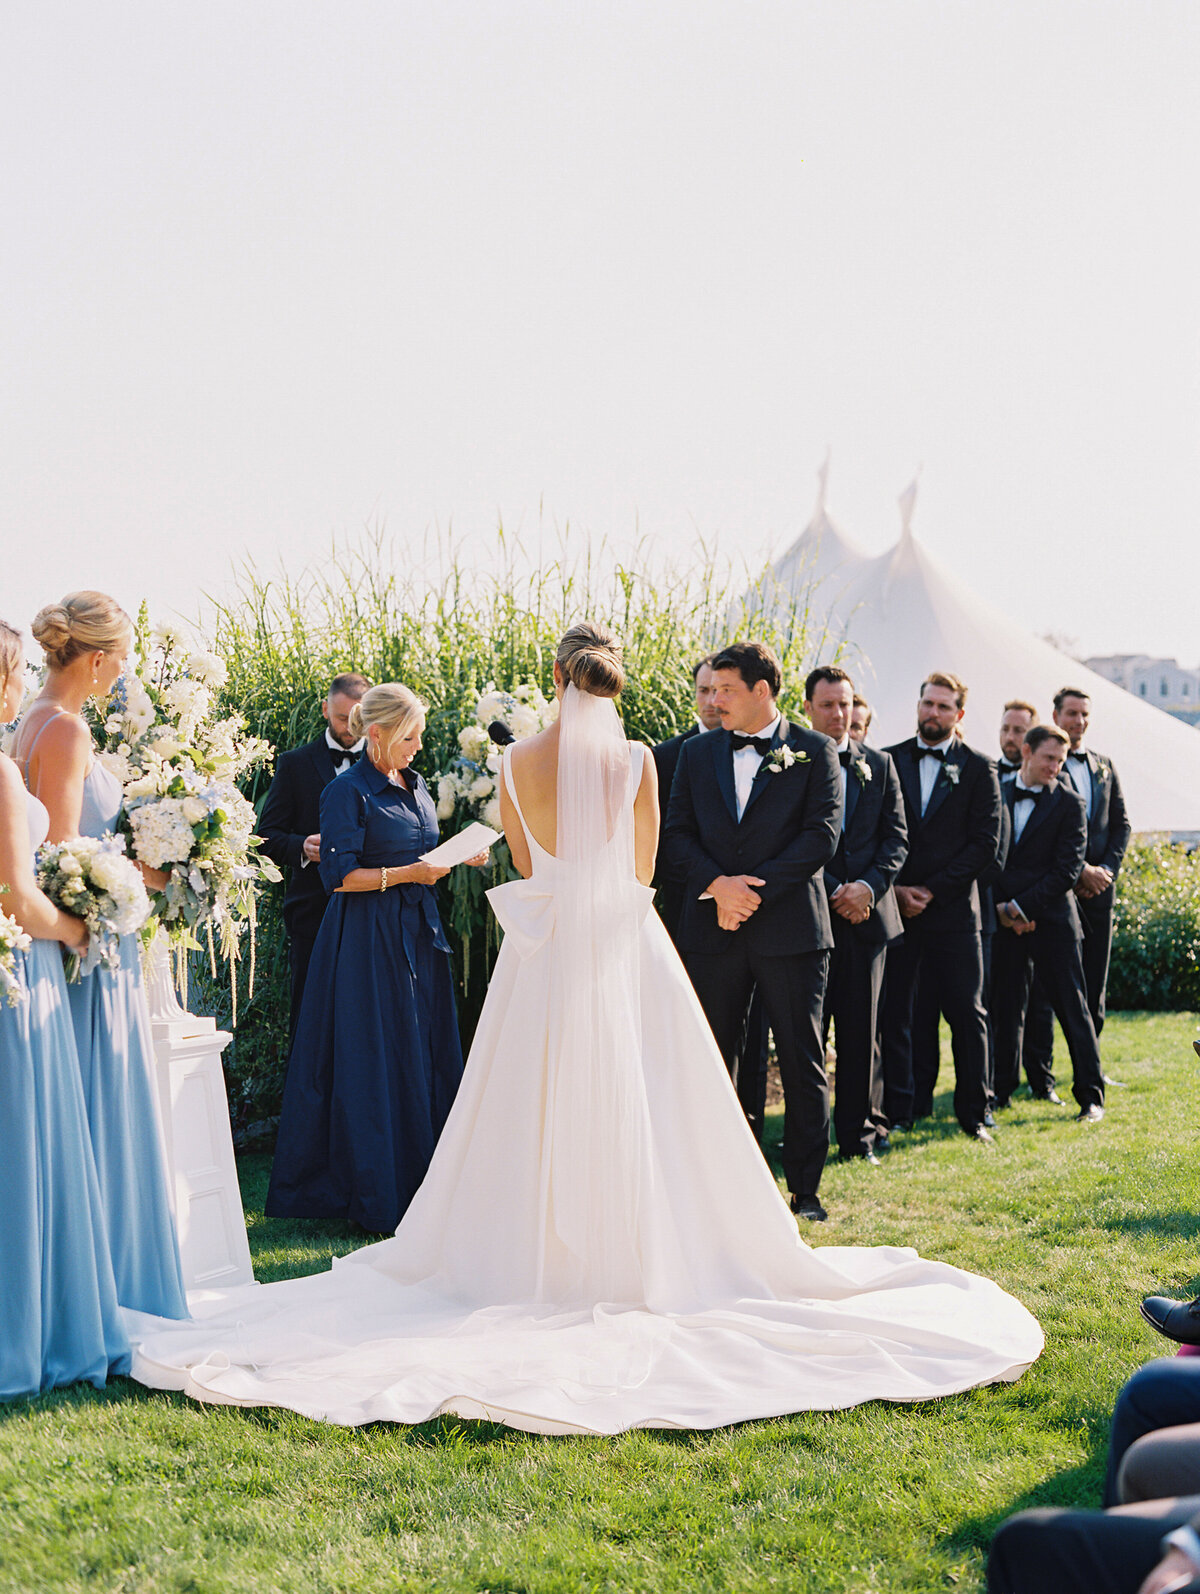 Dusty blue and white wedding in Maine